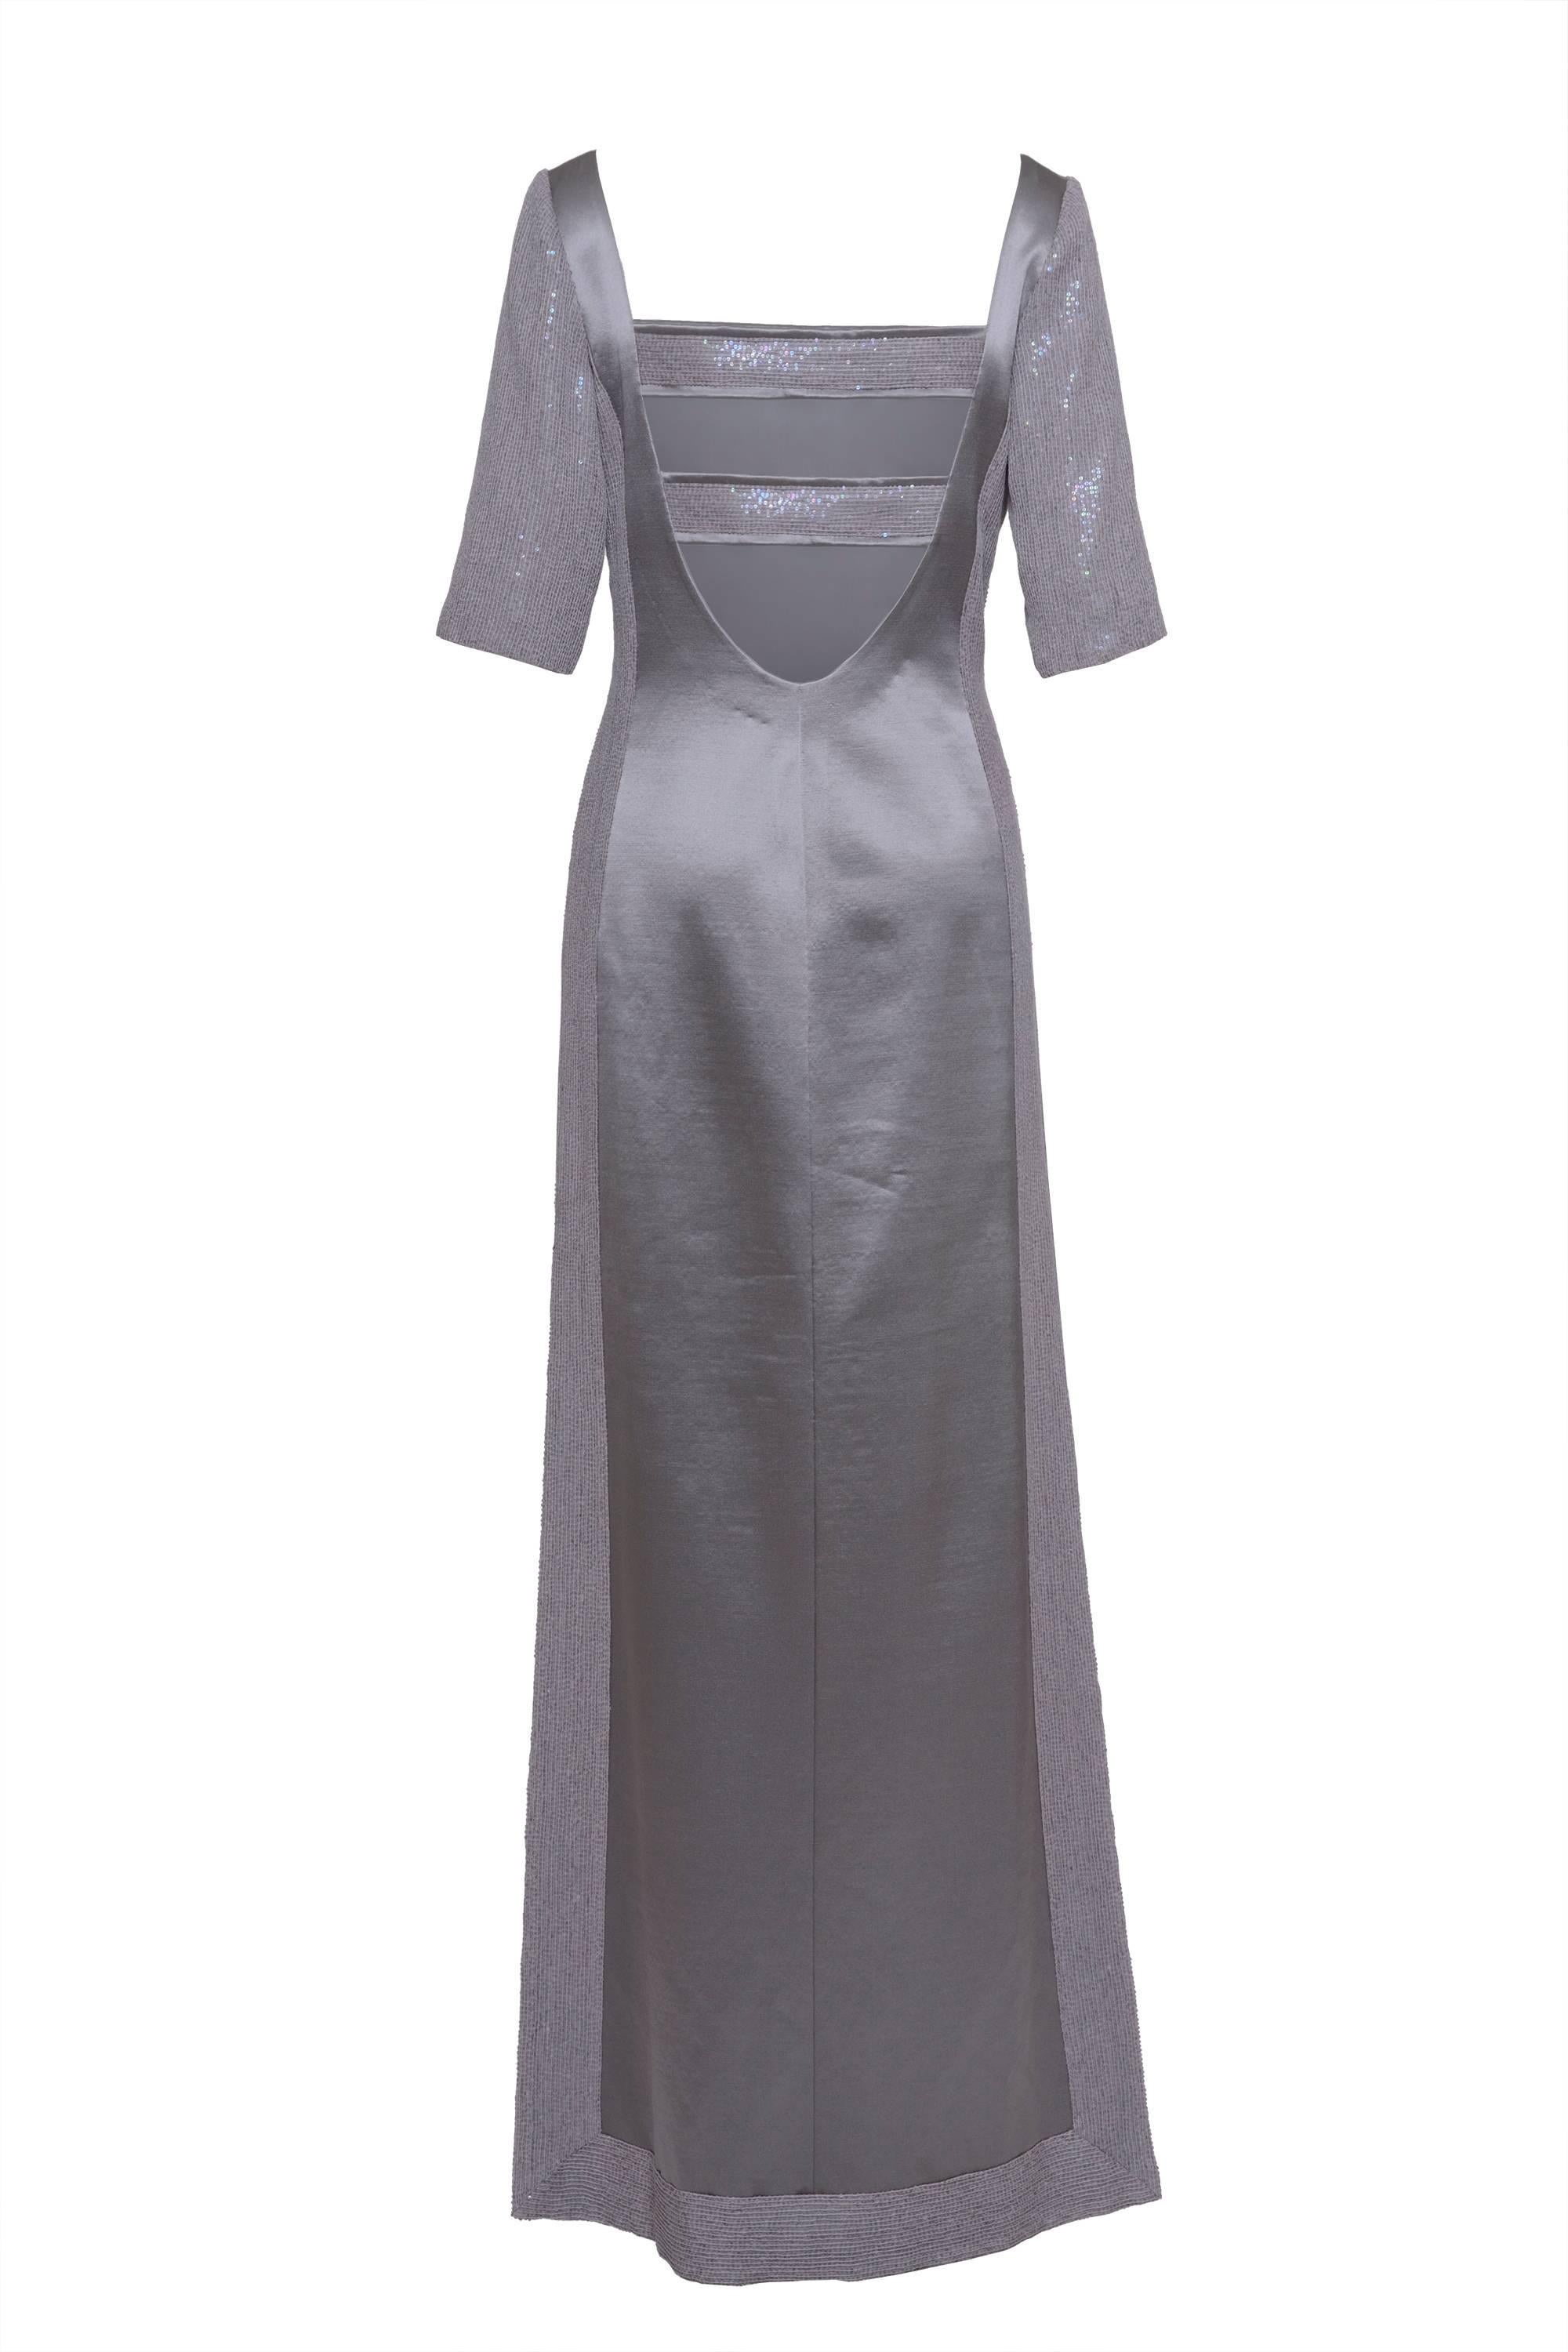 Women's 1990s Gray Embroidered Satin Evening Dress For Sale